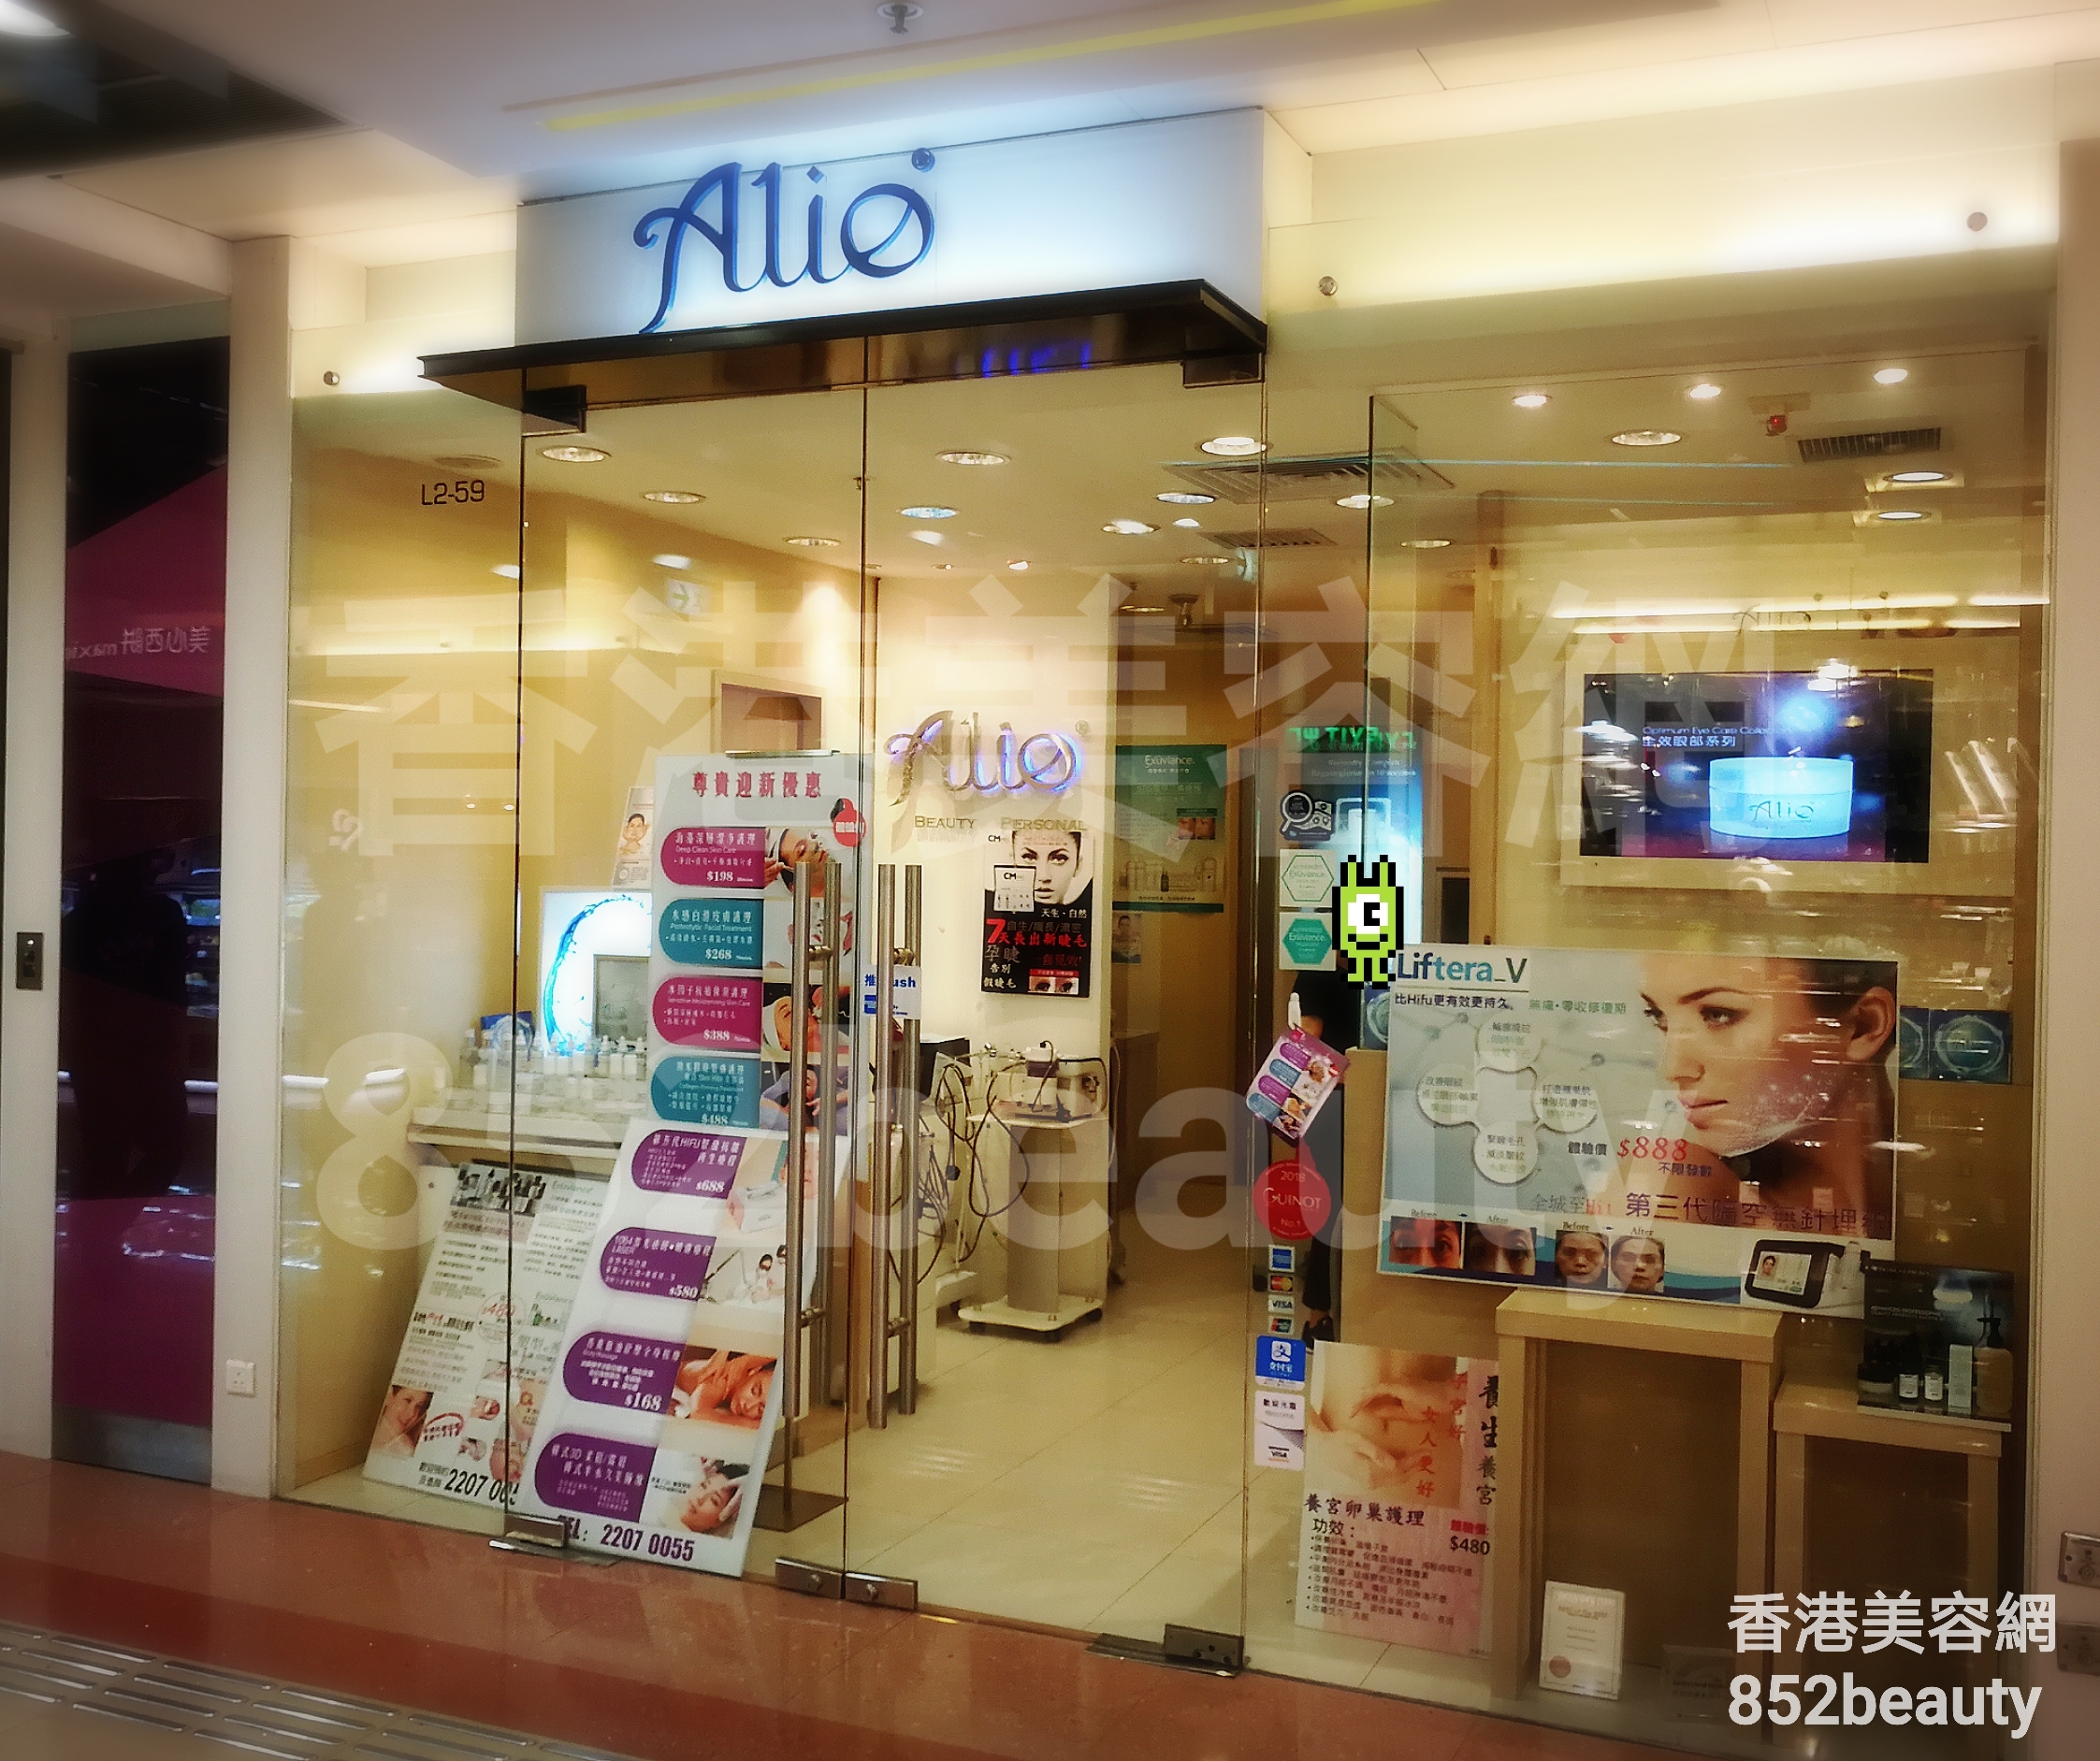 Hair Removal: Alio BEAUTY